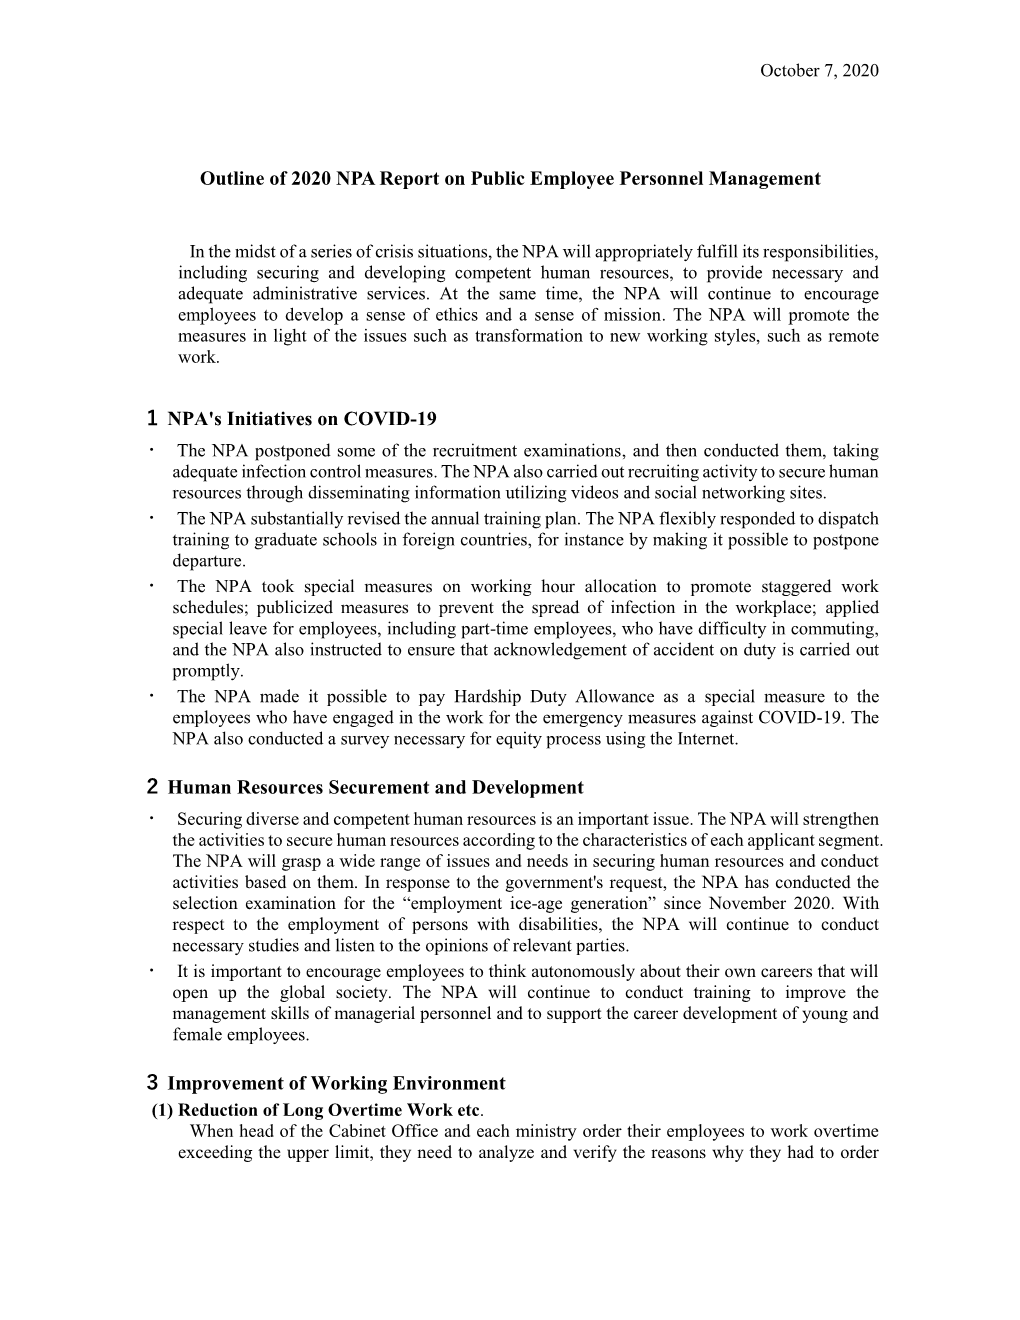 Outline of 2020 NPA Report on Public Employee Personnel Management